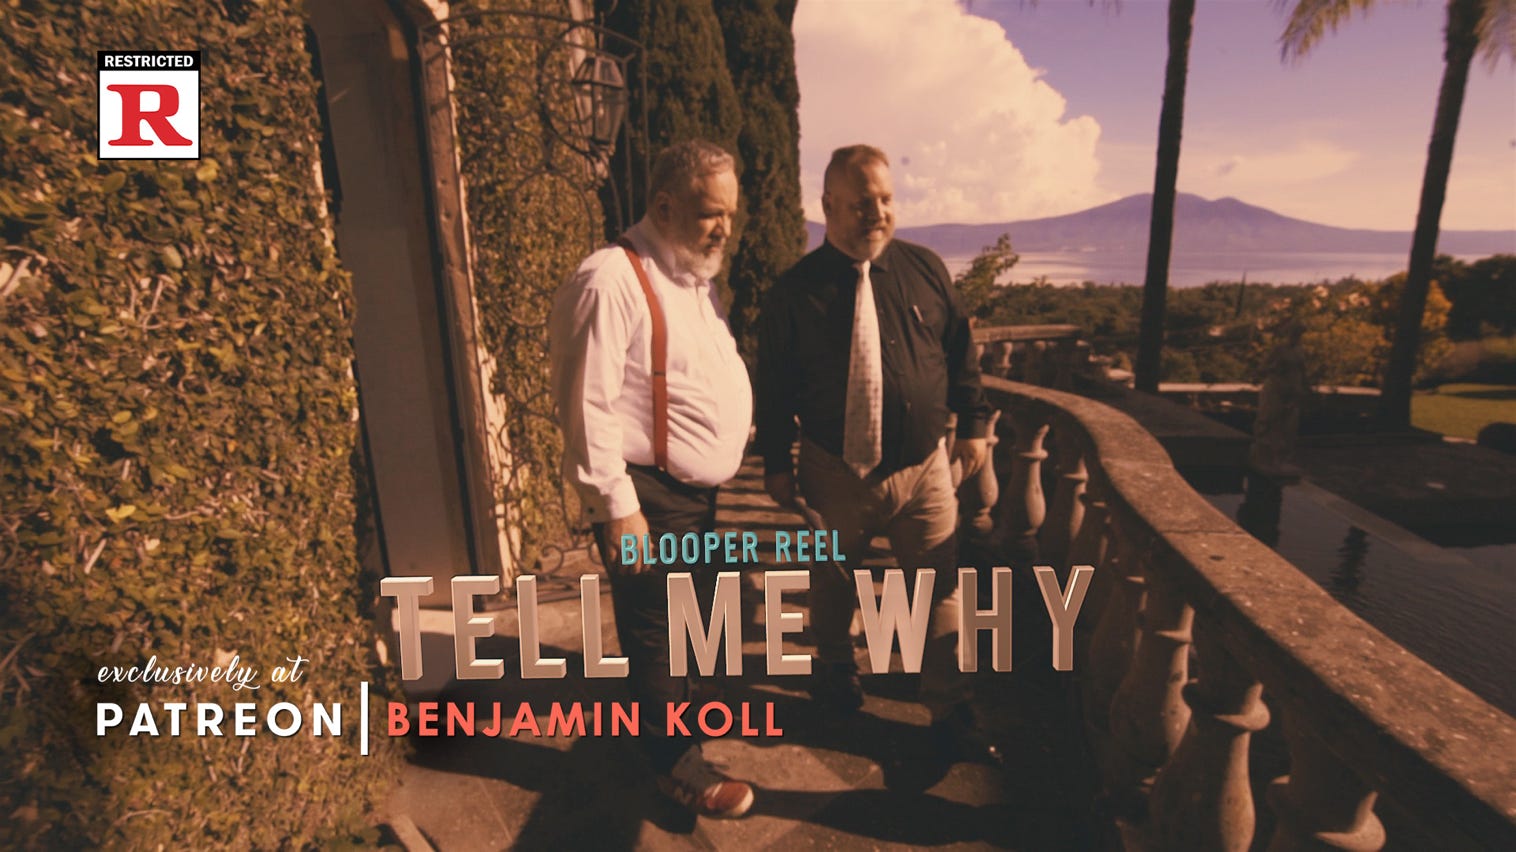 Benjamin Koll & Jeremy Morse - Tell Me Why (Unrated Director's Cut Blooper Reel) - Patreon Exclusive